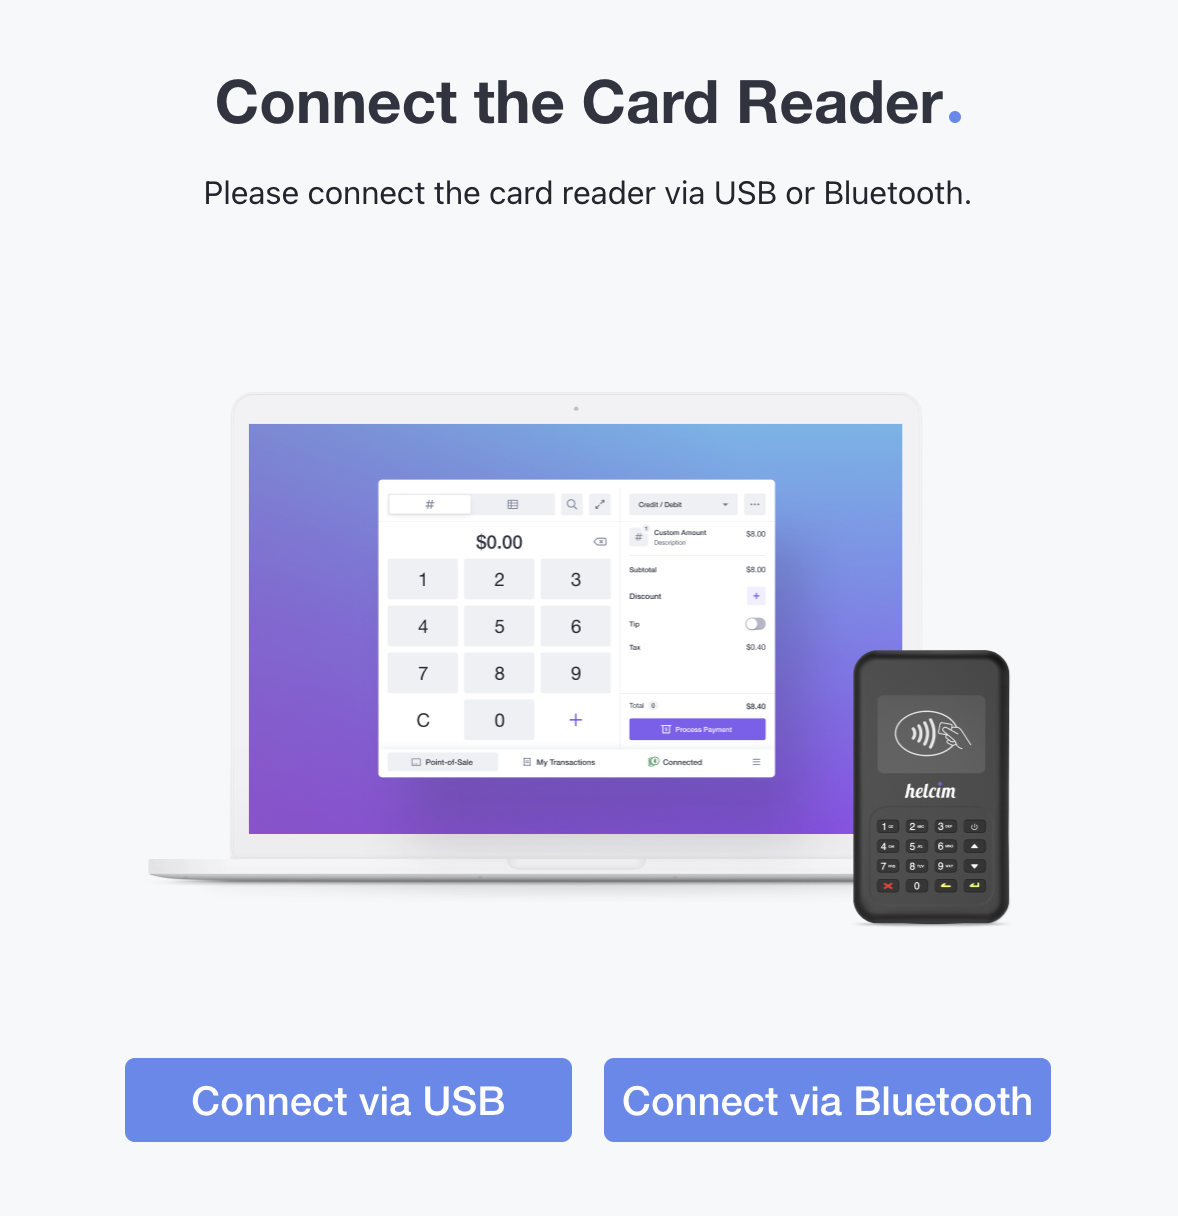 Connect the Card Reader